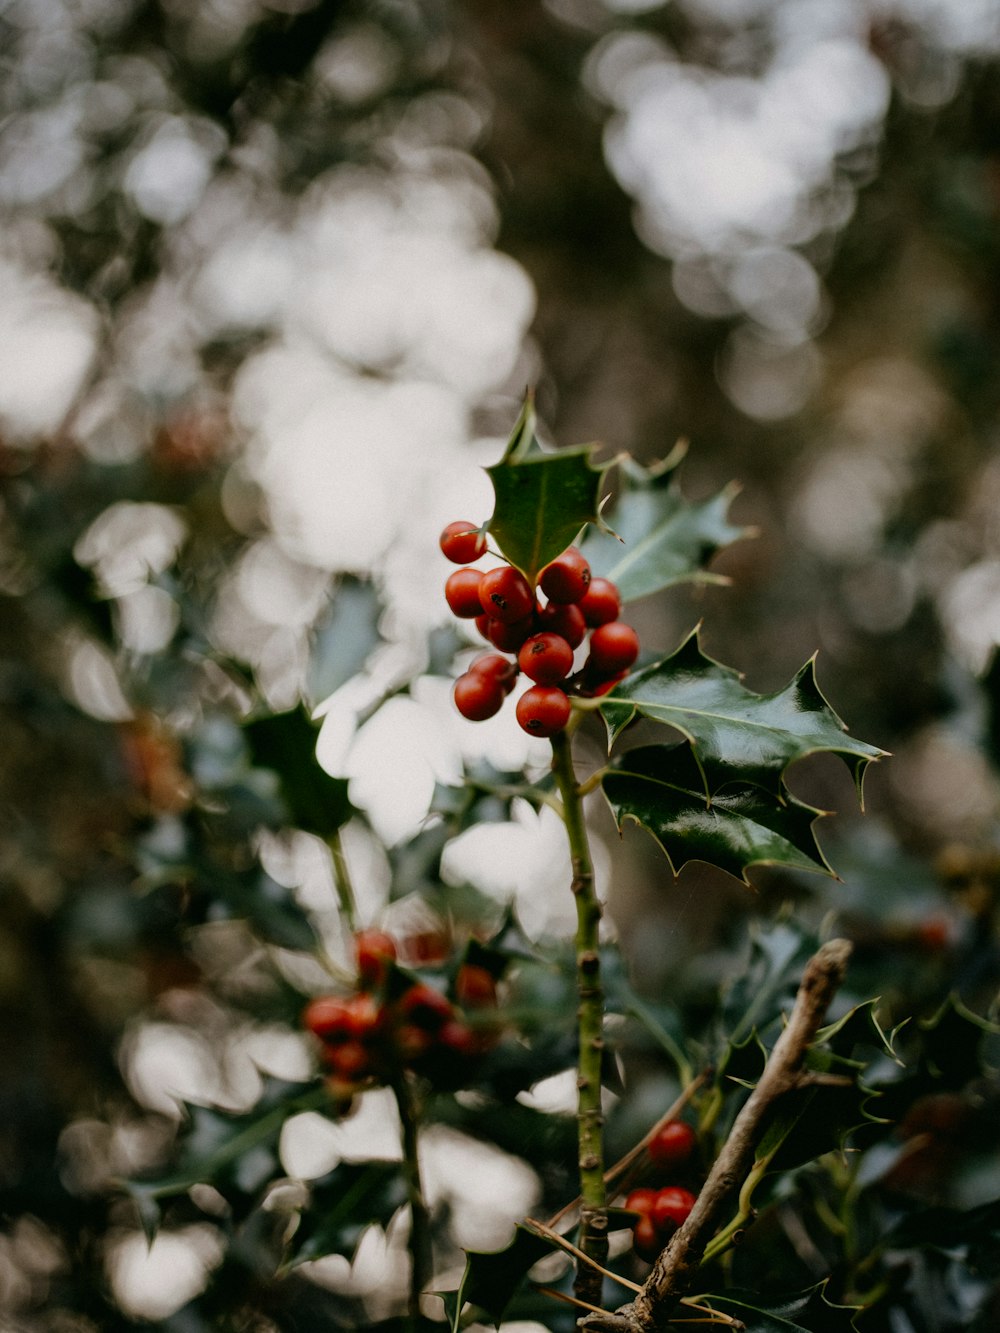 a holly plant with red berries and green leaves